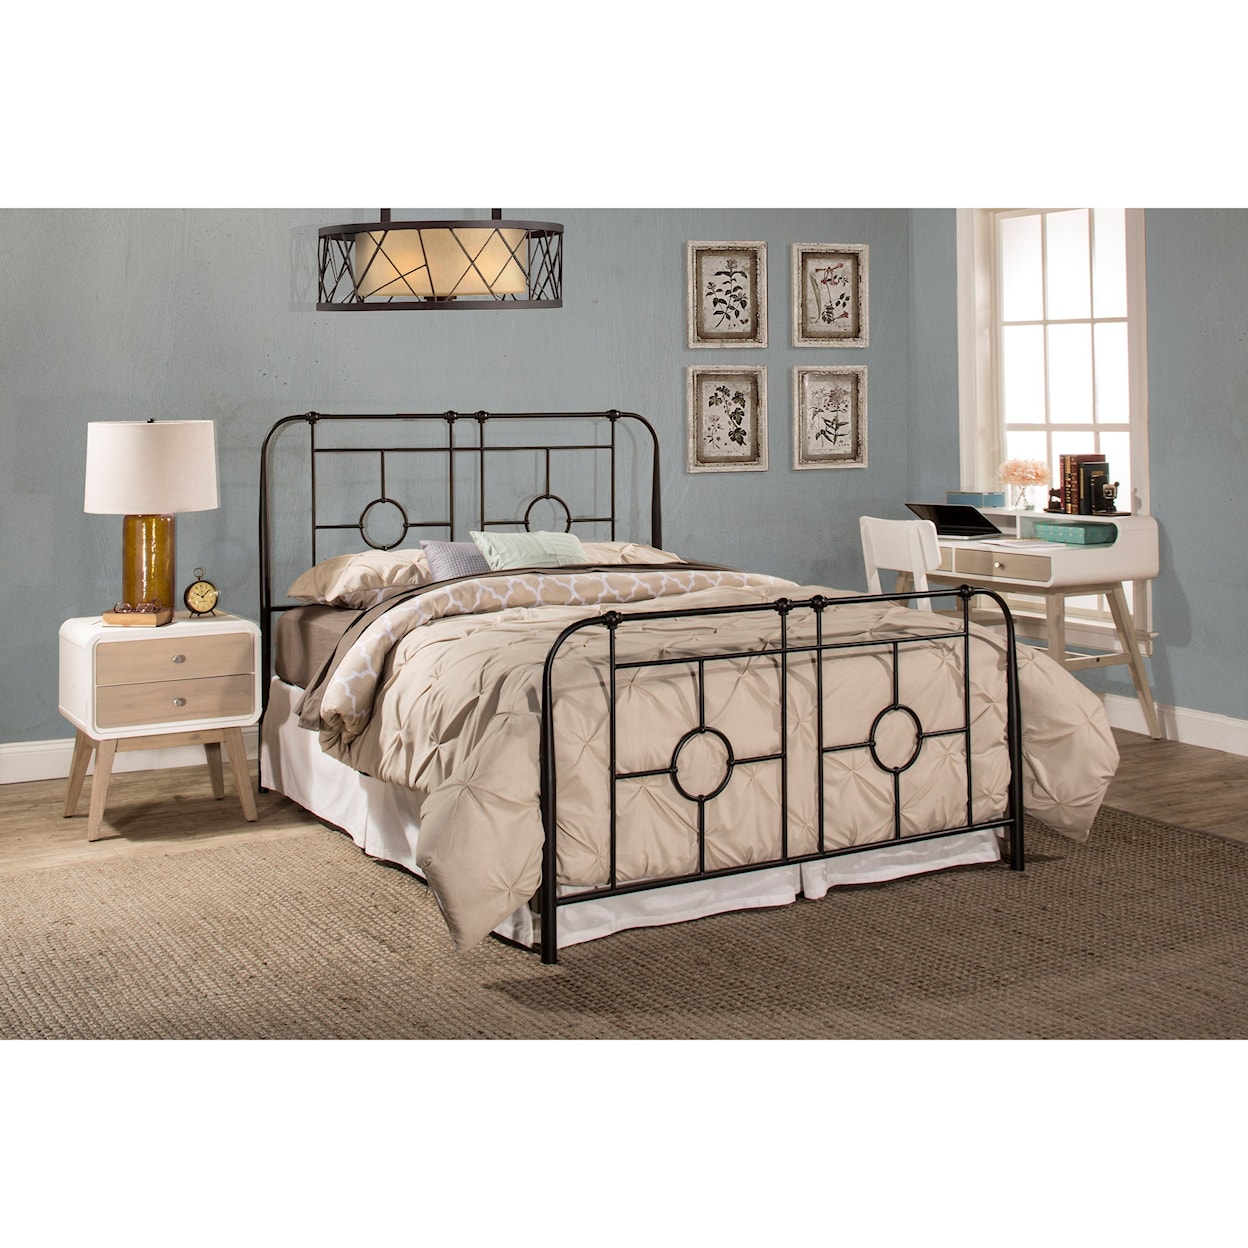 Hillsdale Metal Beds King Headboard with Frame